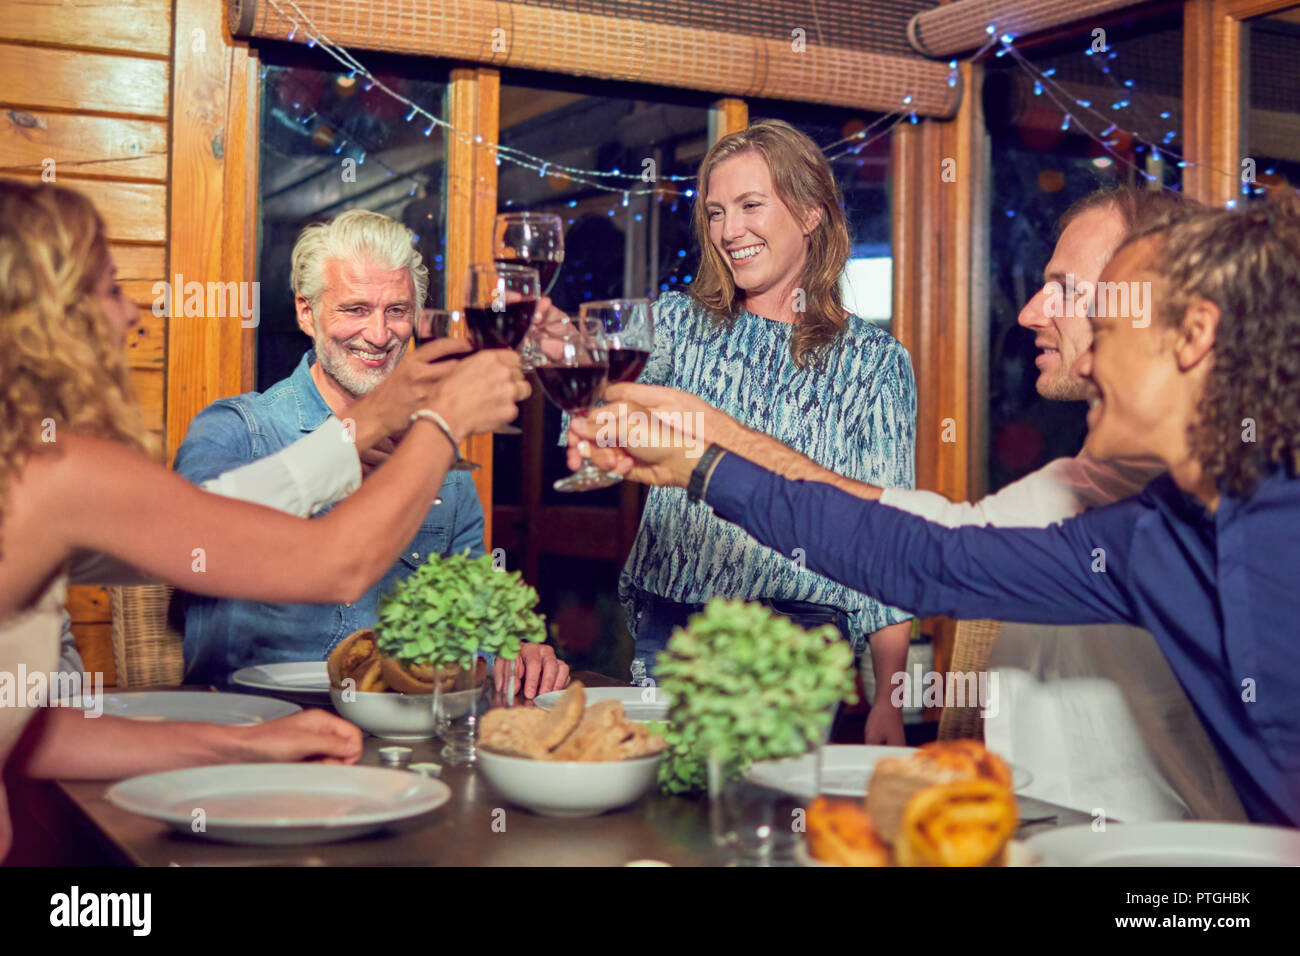 Friends celebrating, drinking red wine and enjoying dinner in cabin Stock Photo